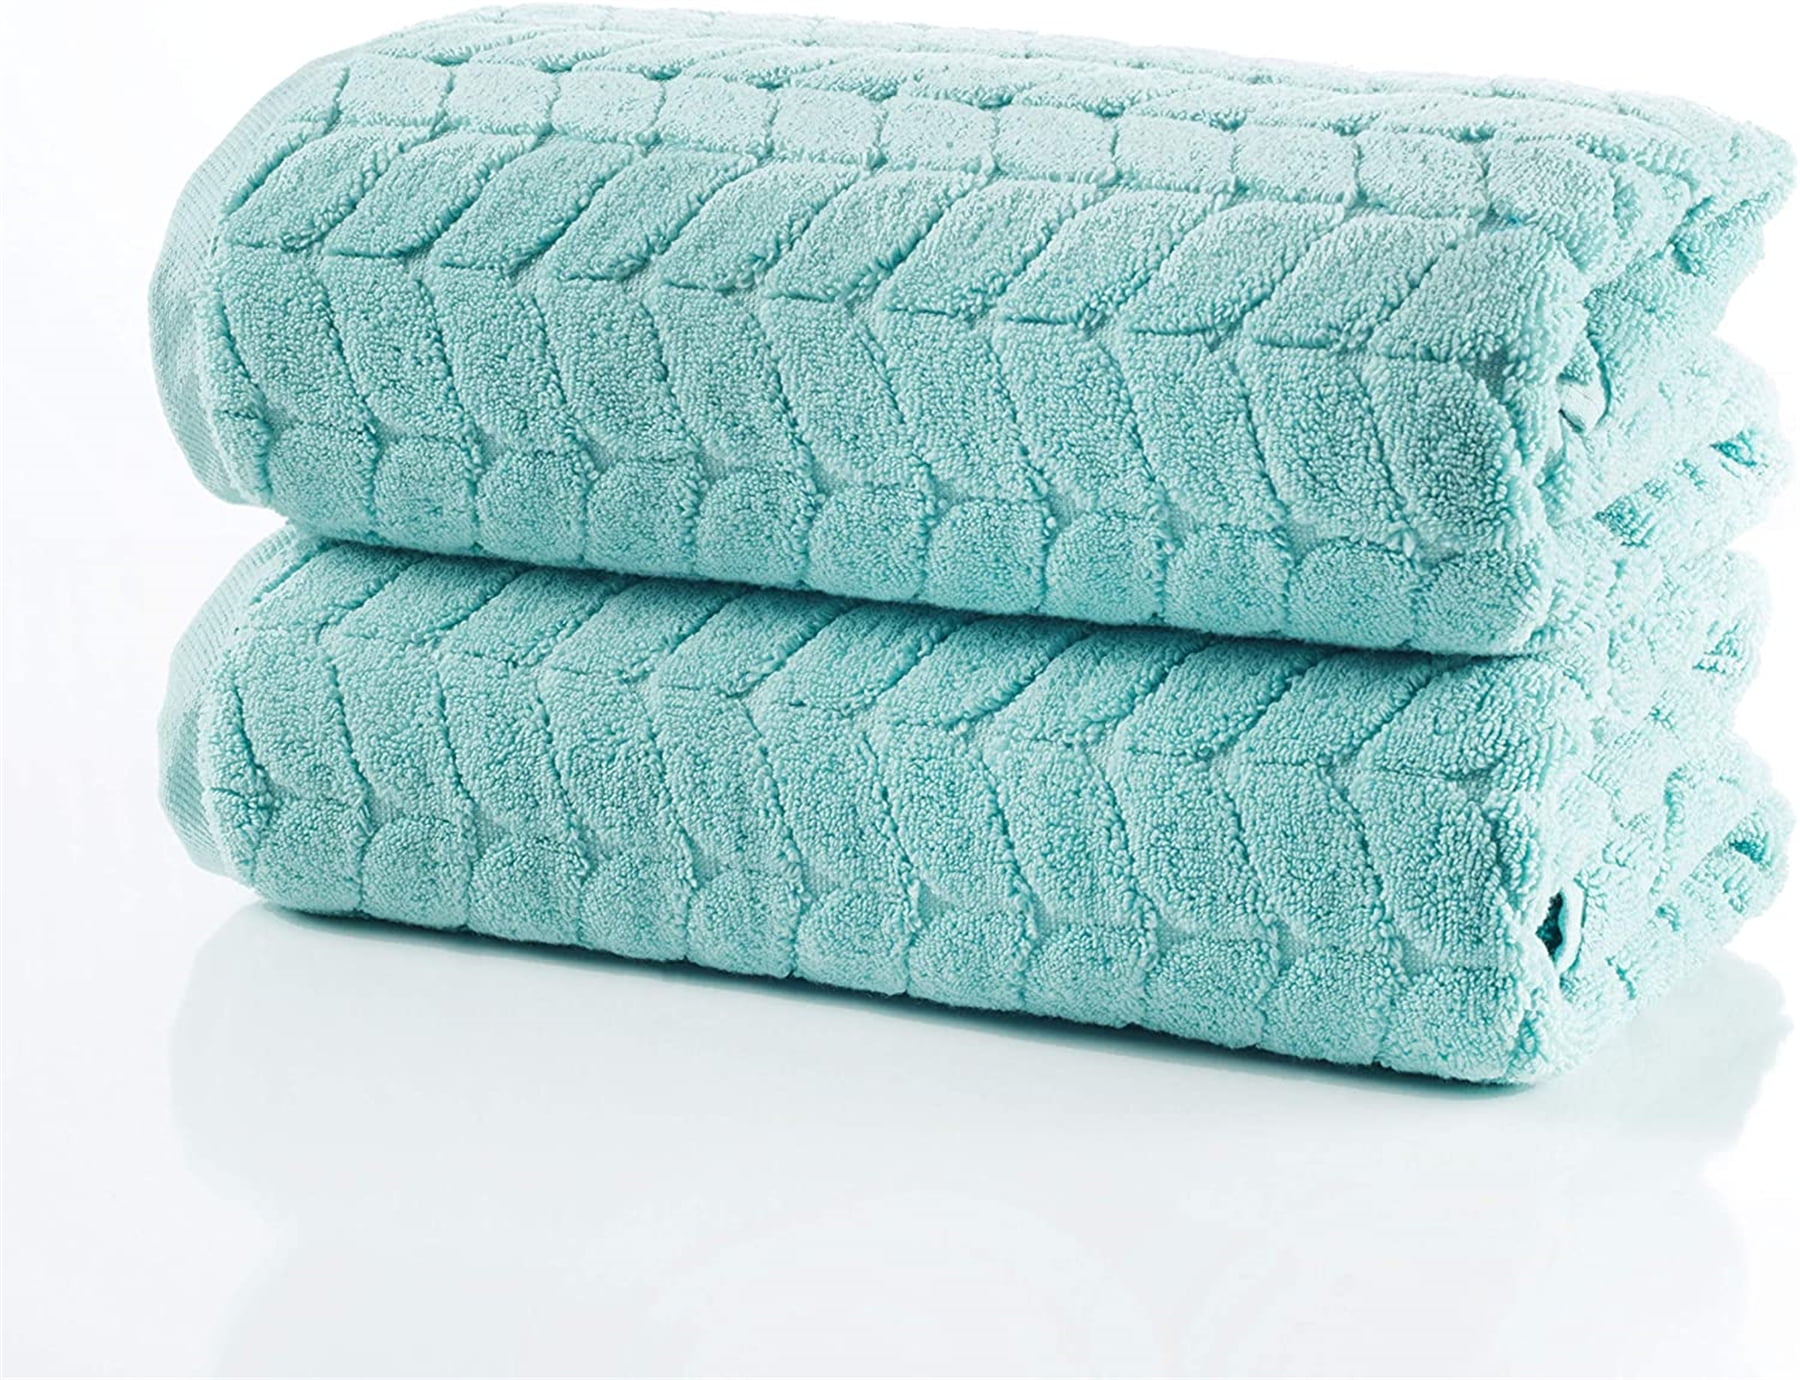 MintLimit 140*70CM Bath Towel Extra Large family bath towel Thick, Soft,  Pure color Plush and Highly Absorbent Luxury Hotel & Spa Quality Towels X1